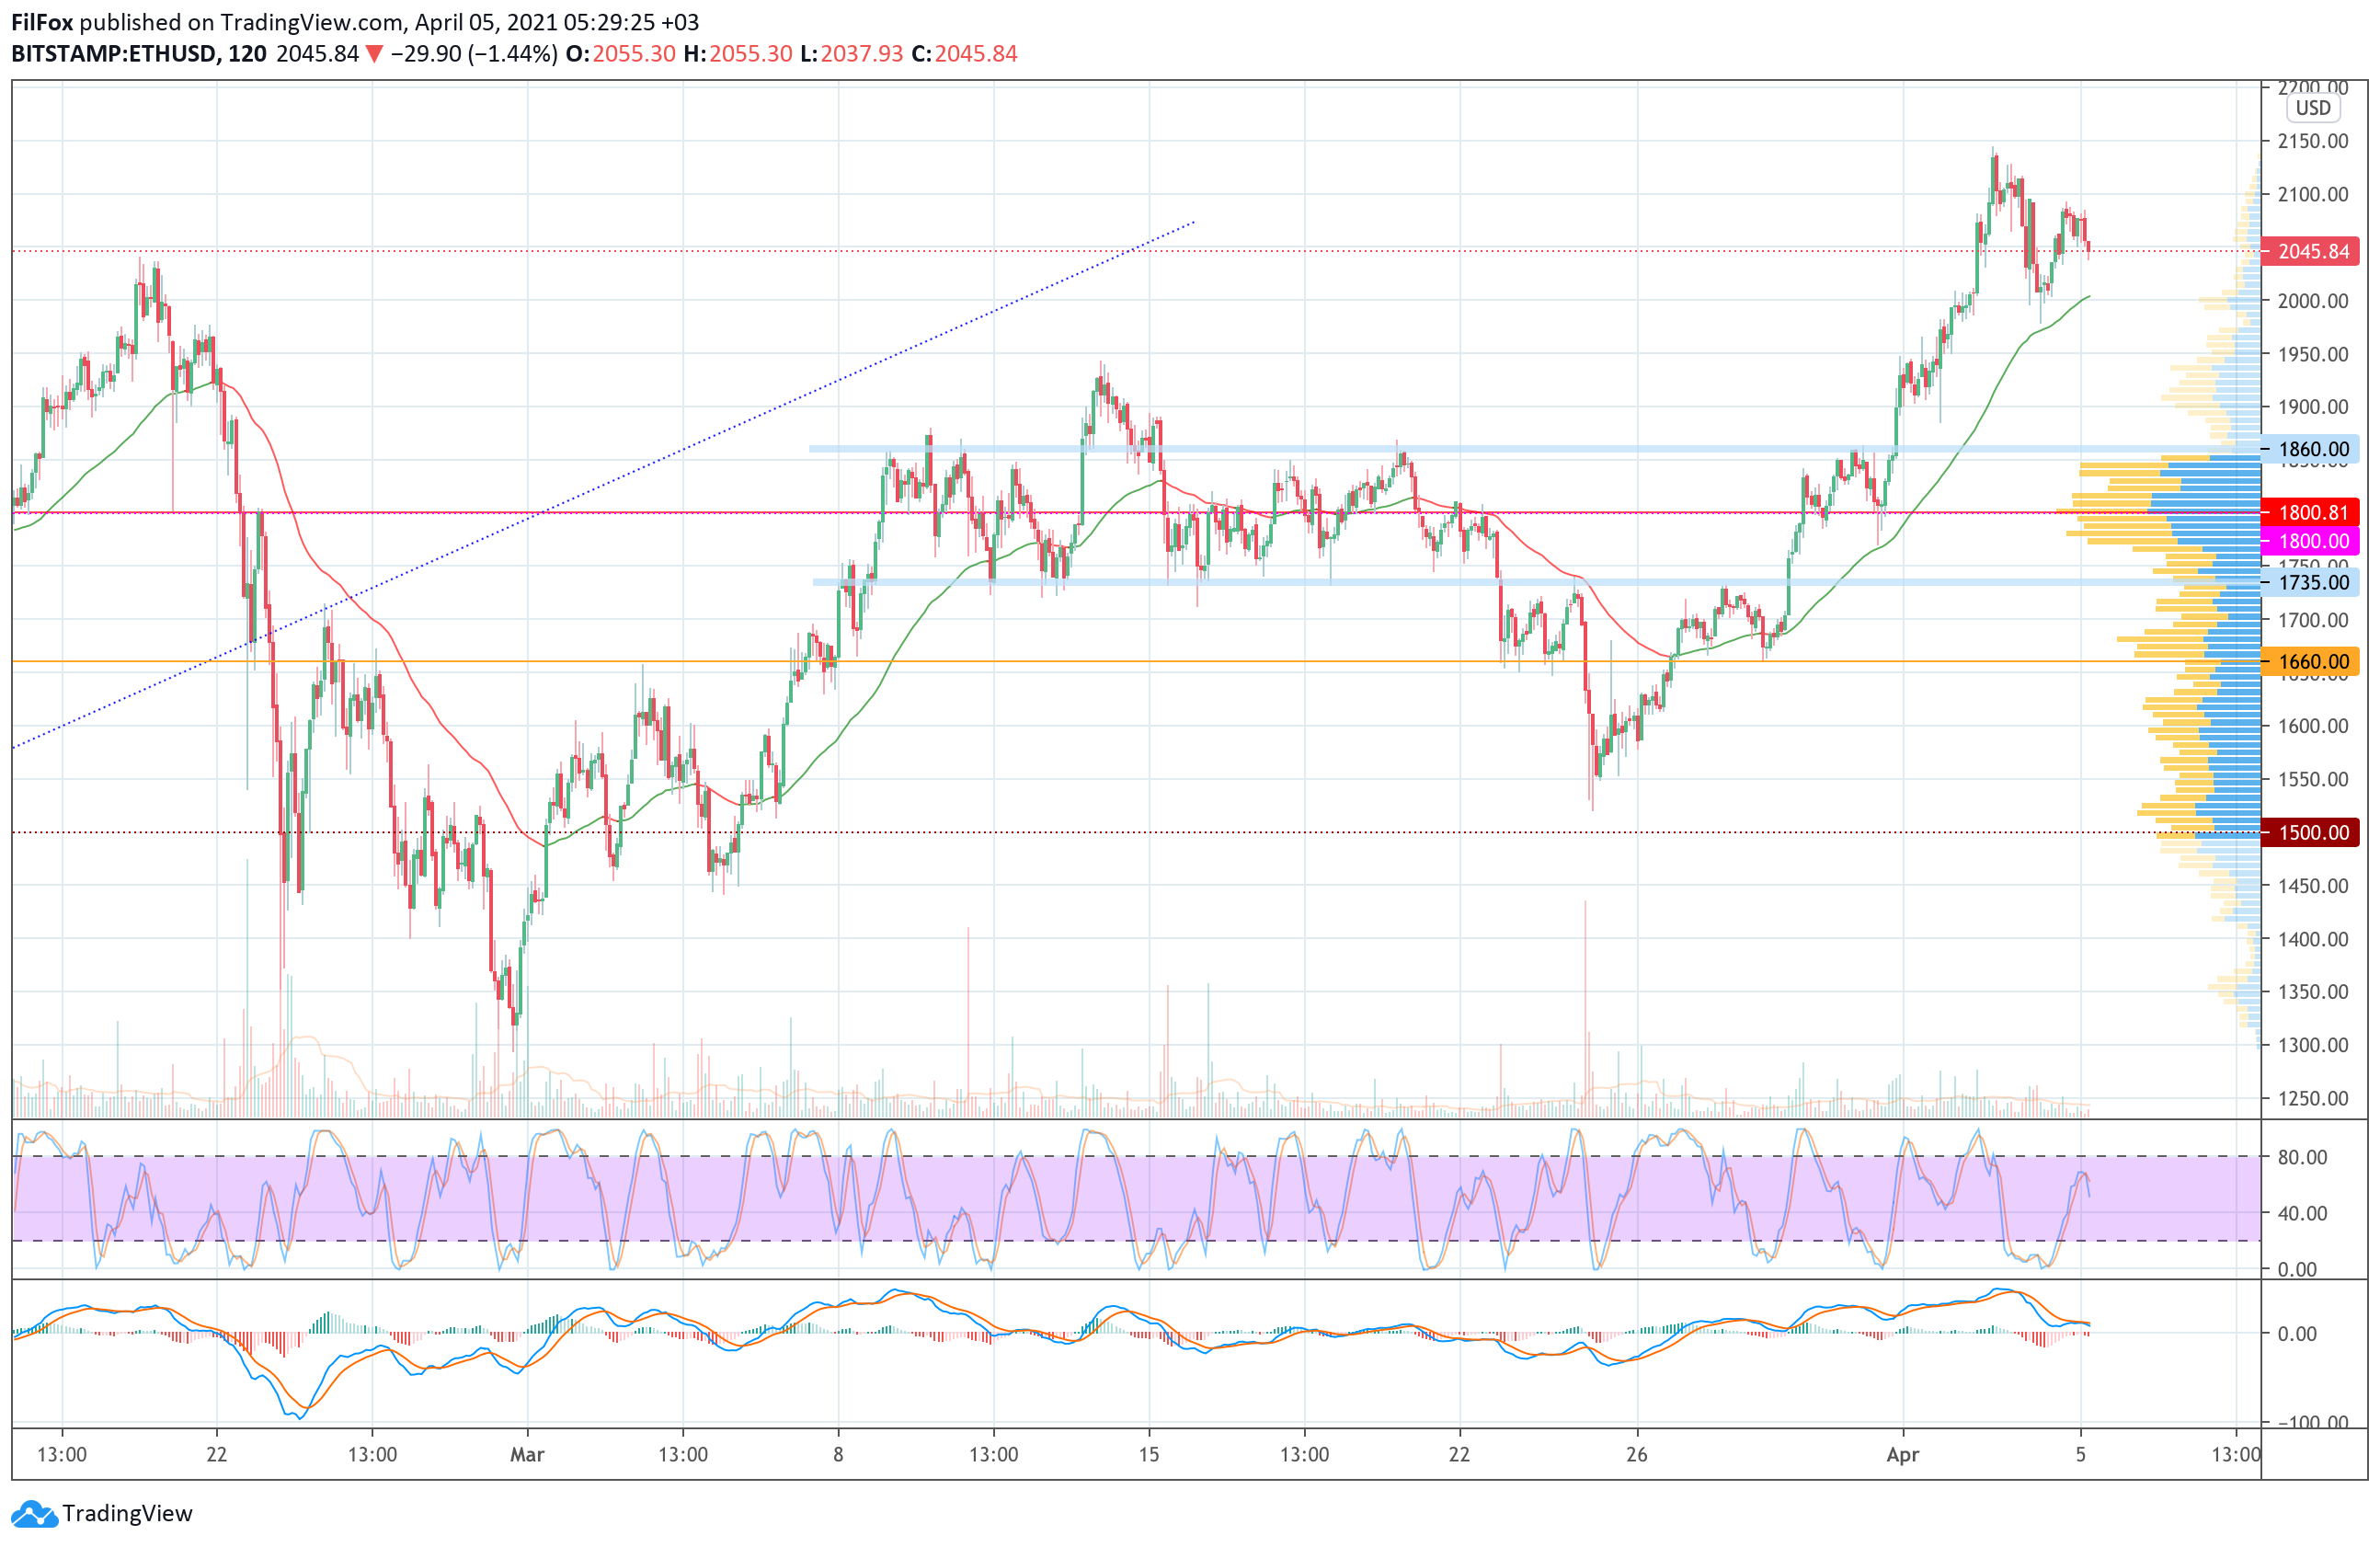 Analysis of prices for Bitcoin, Ethereum, XRP for 04/05/2021